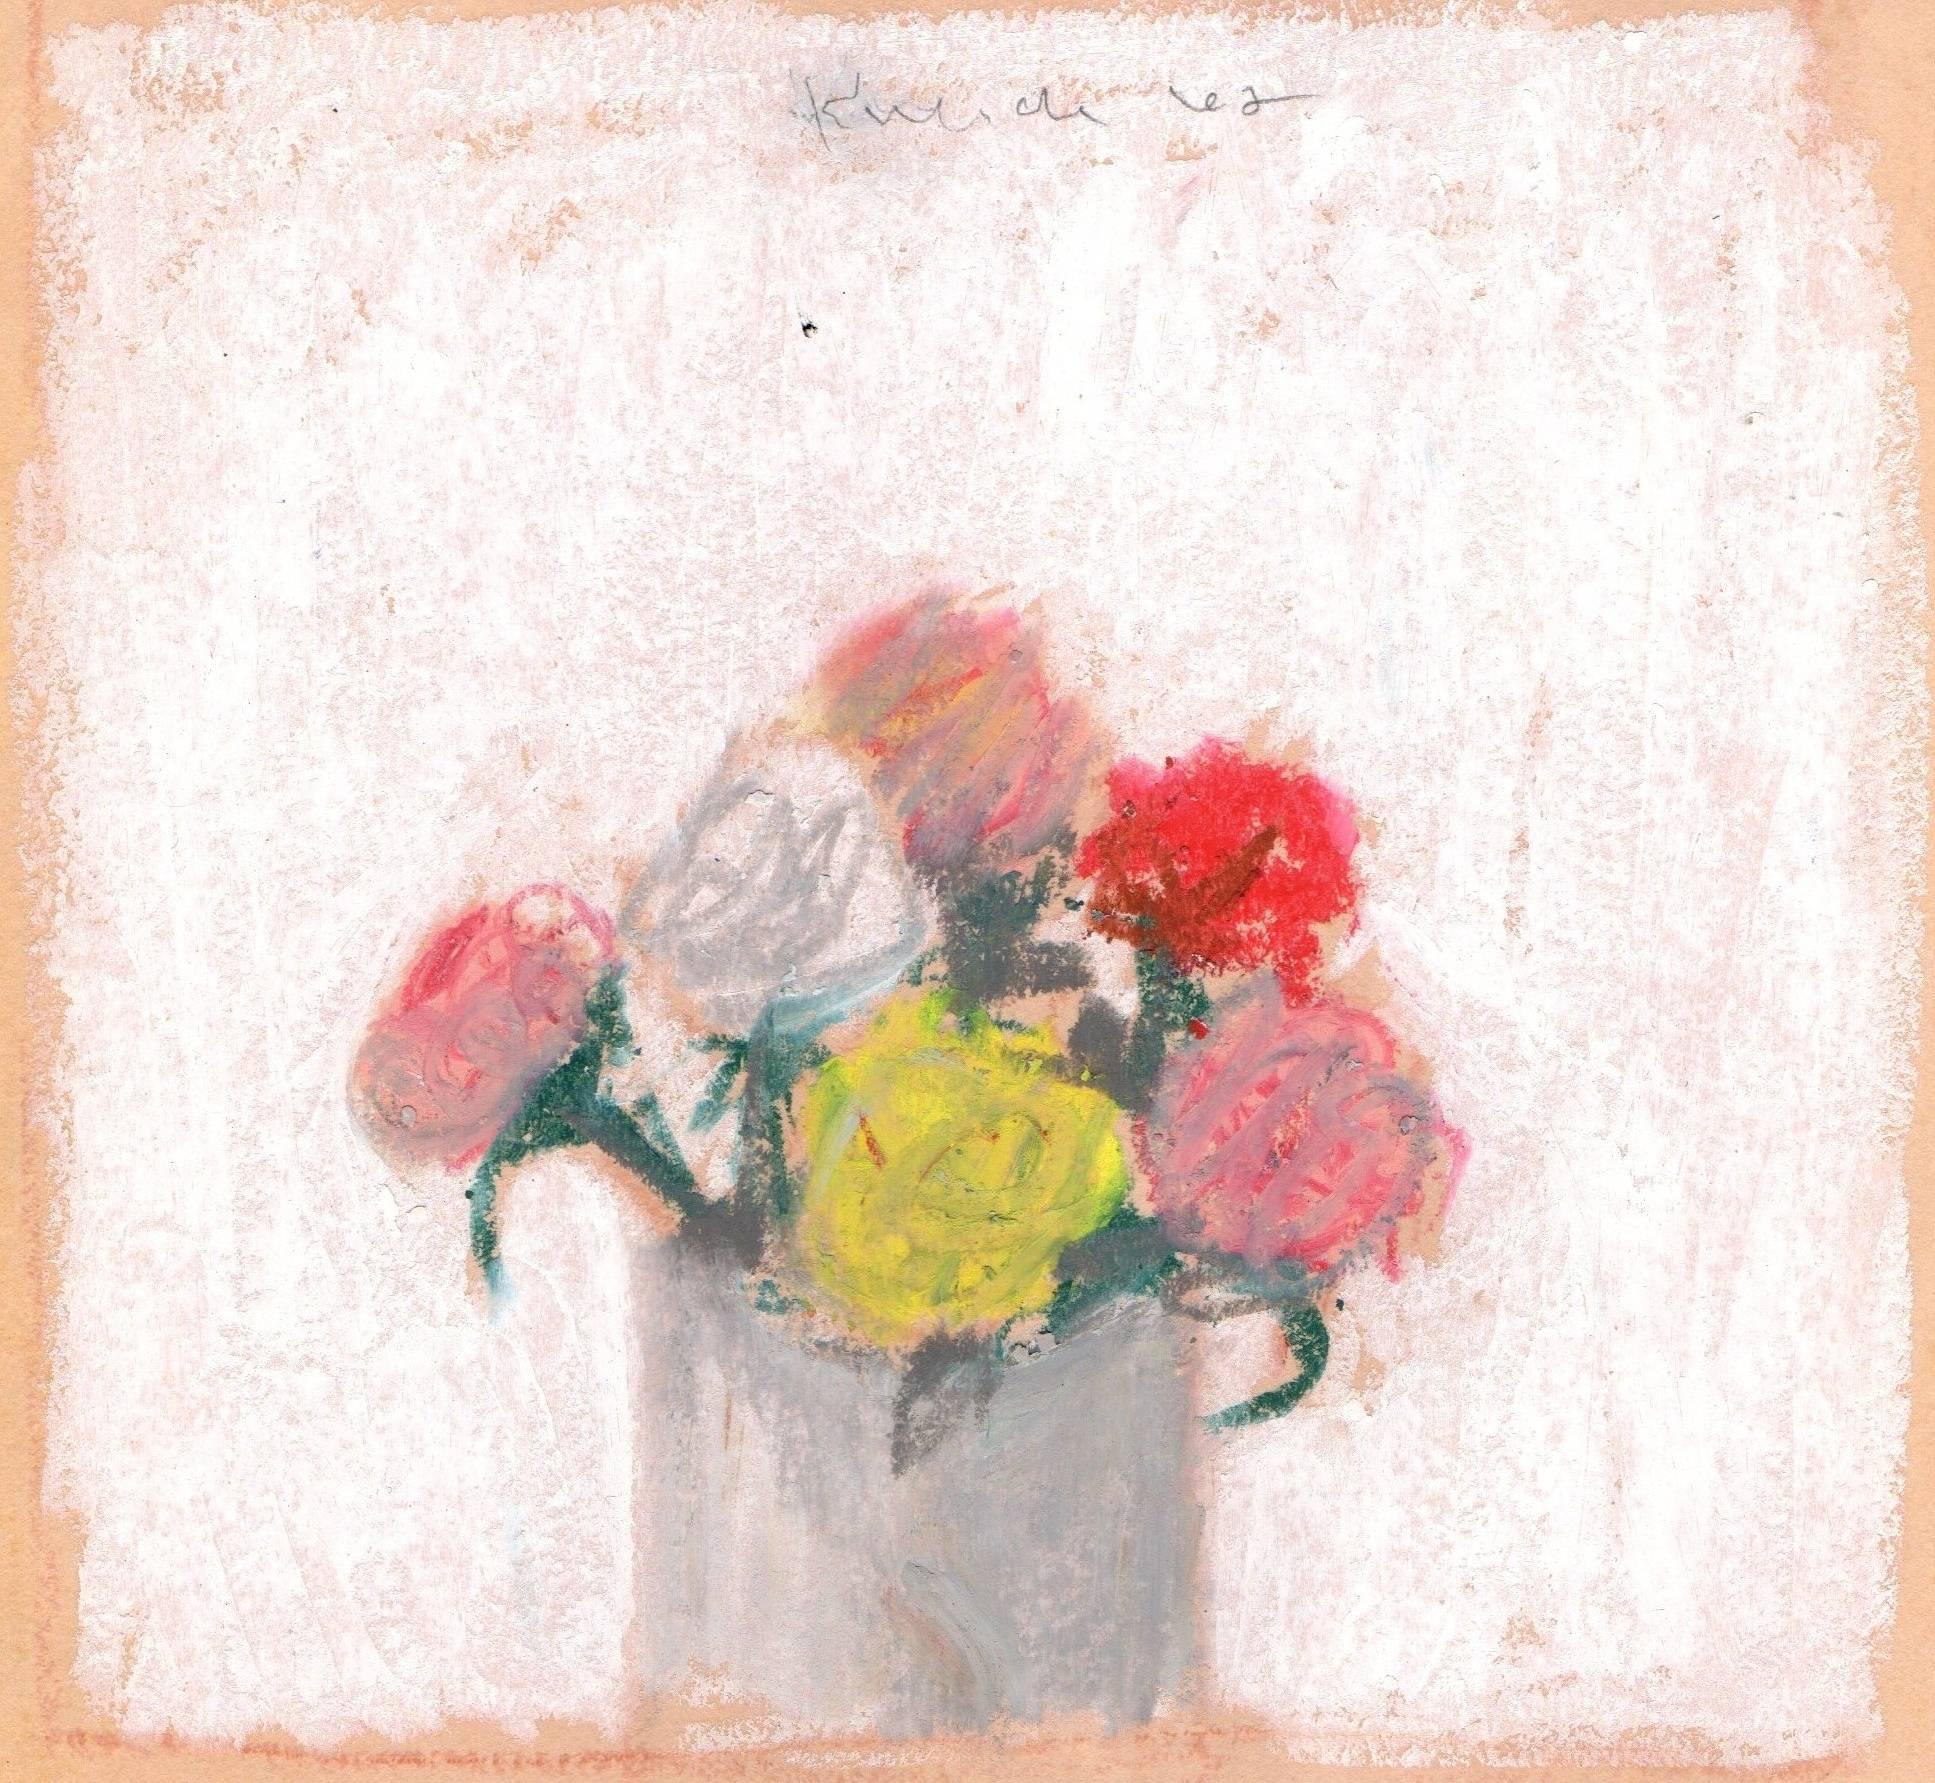 Red, Pink, Yellow, and White Flowers in a Vase Against a White Background - Art by Robert Kulicke